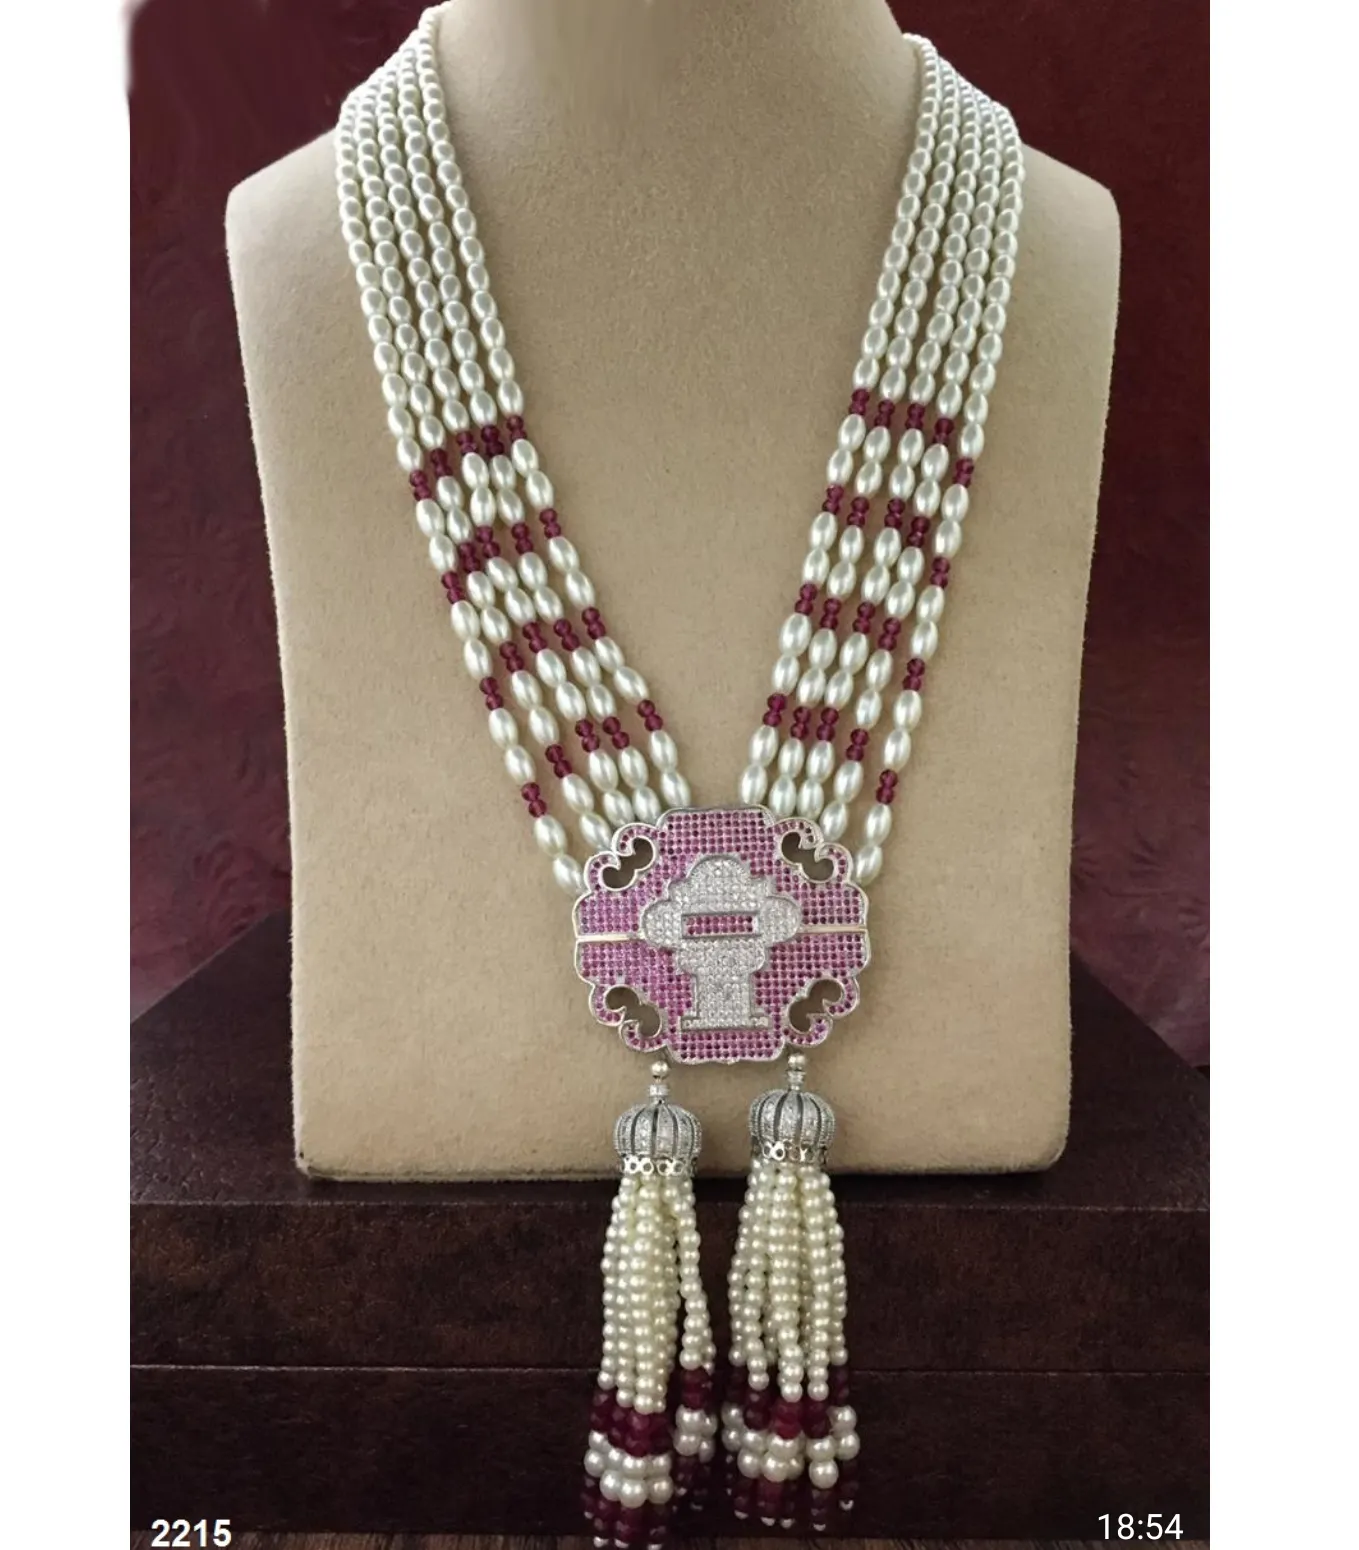 Traditional White Pearl Beaded Necklace With Hot Design Pink Garnet Beads Necklace Jewelry Set For Valentine Day Gift